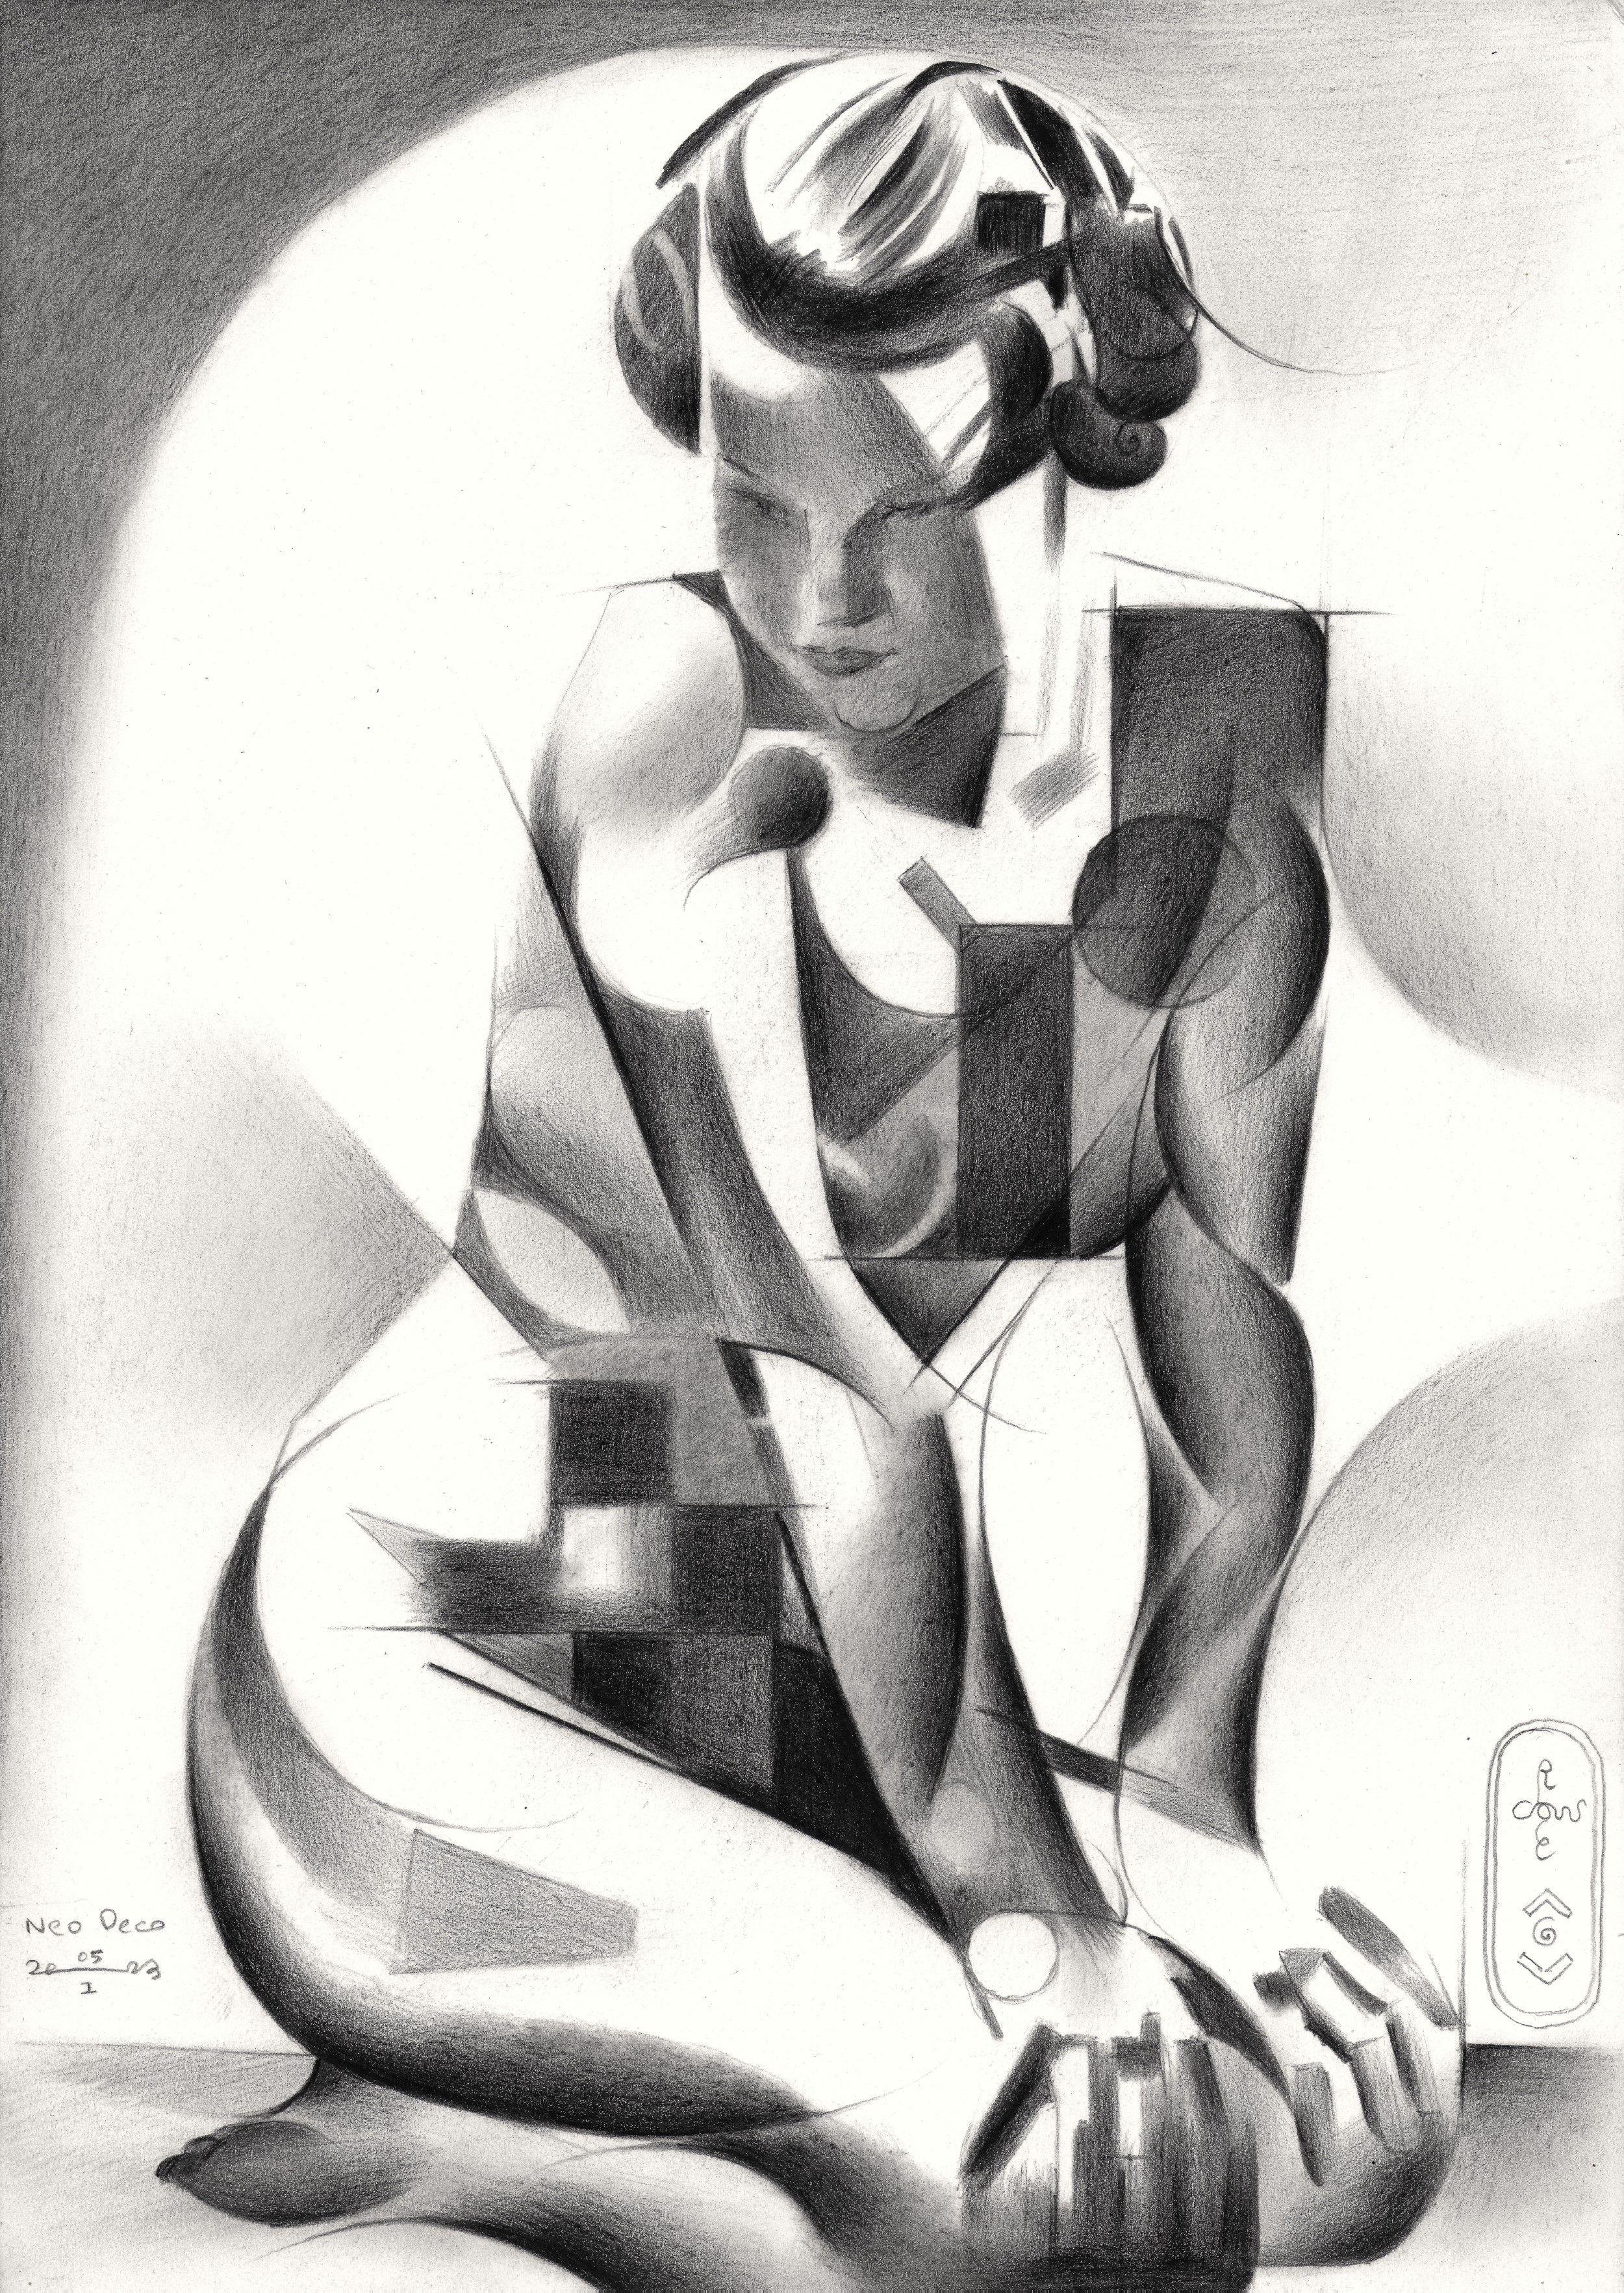 Neo Deco - 05-01-23, Drawing, Pencil/Colored Pencil on Paper - Art by Corne Akkers